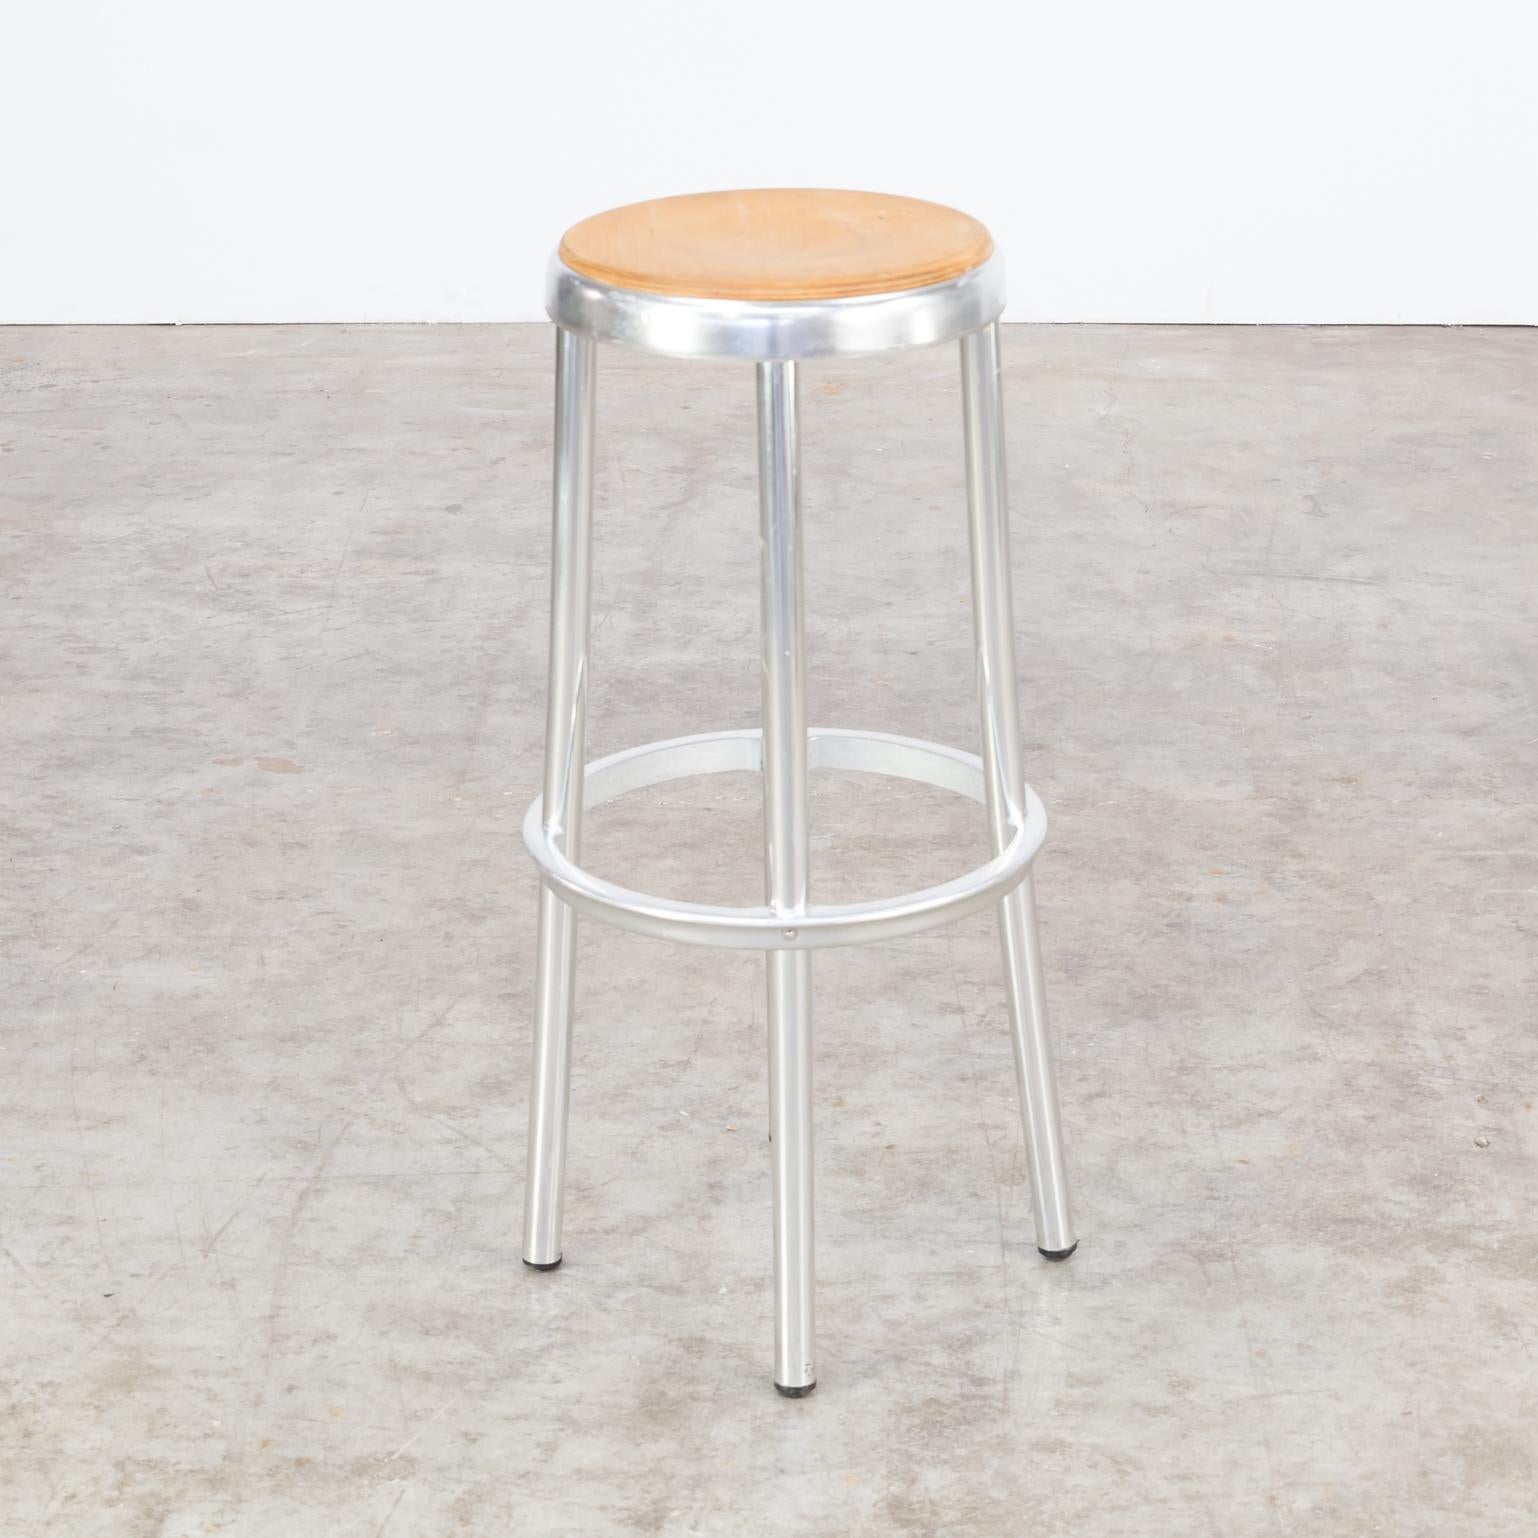 Midcentury Aluminium Framed Wooden Seated Stools Set of 2 In Good Condition For Sale In Amstelveen, Noord